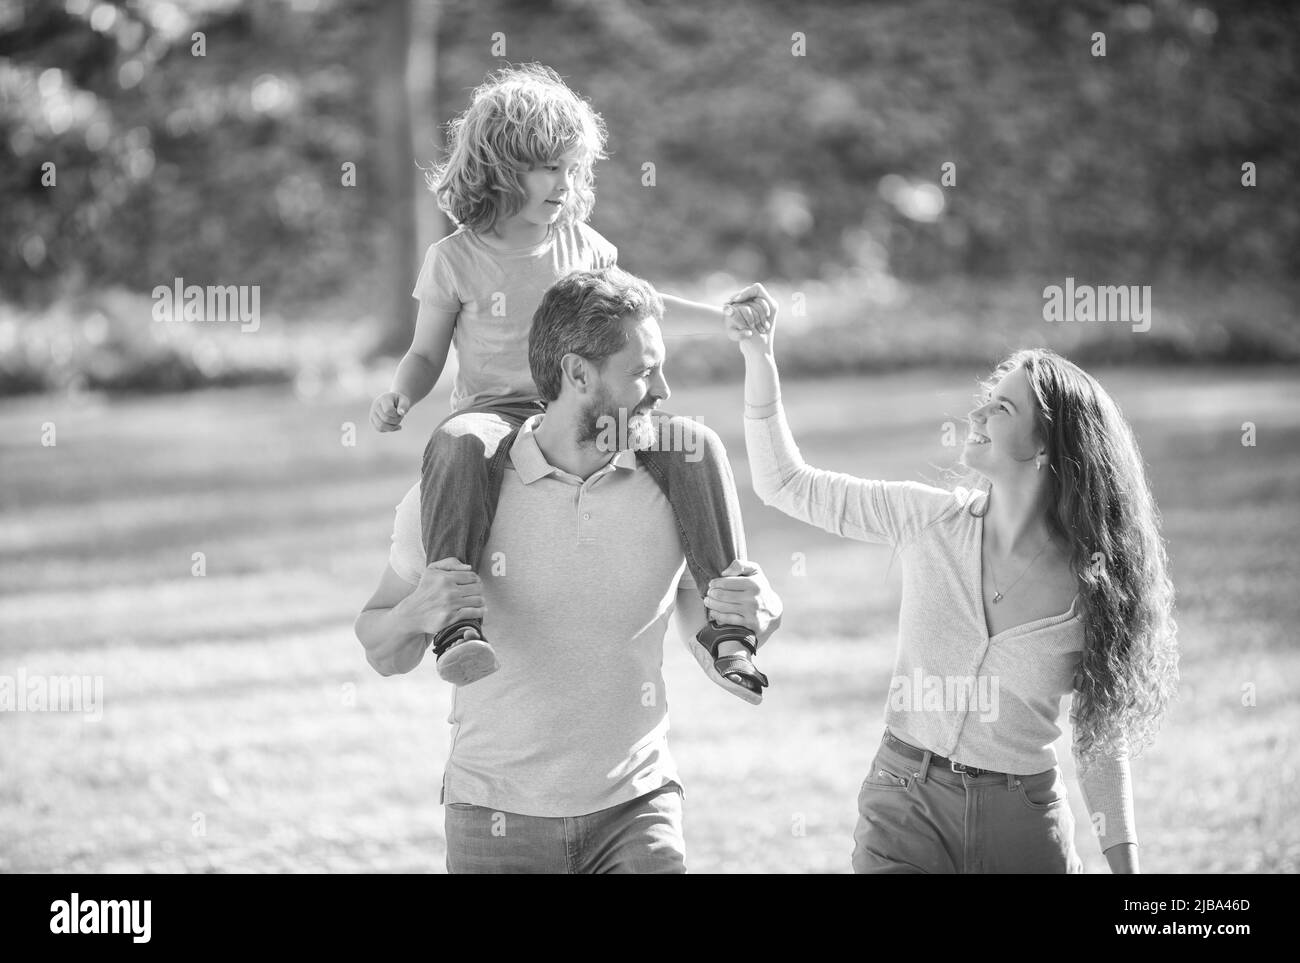 Foster care. Foster parents and son. Mother and child riding piggy back on father. Adoptive family Stock Photo